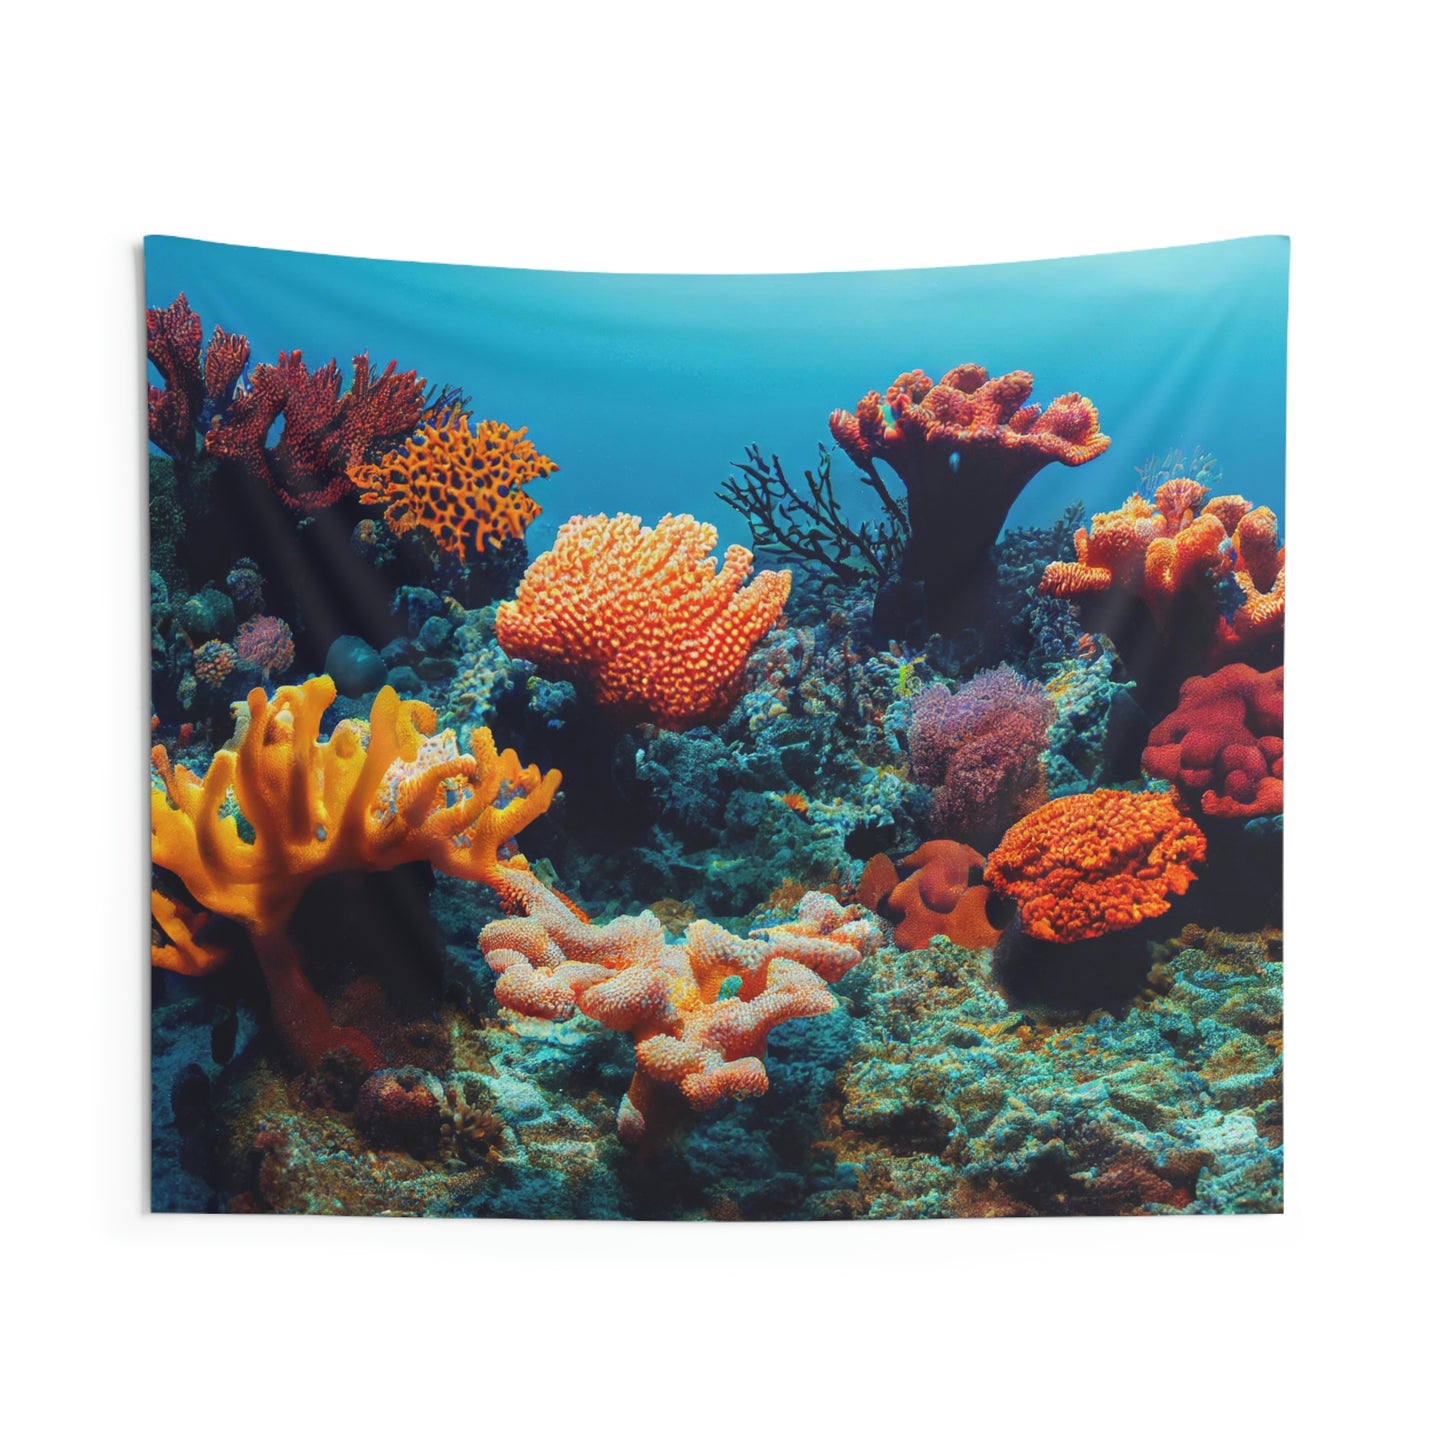 Coral Reef Tapestry, Under Water Photo Ocean Wall Art Hanging Landscape Realistic Aesthetic Large Small Decor Home College Dorm Starcove Fashion